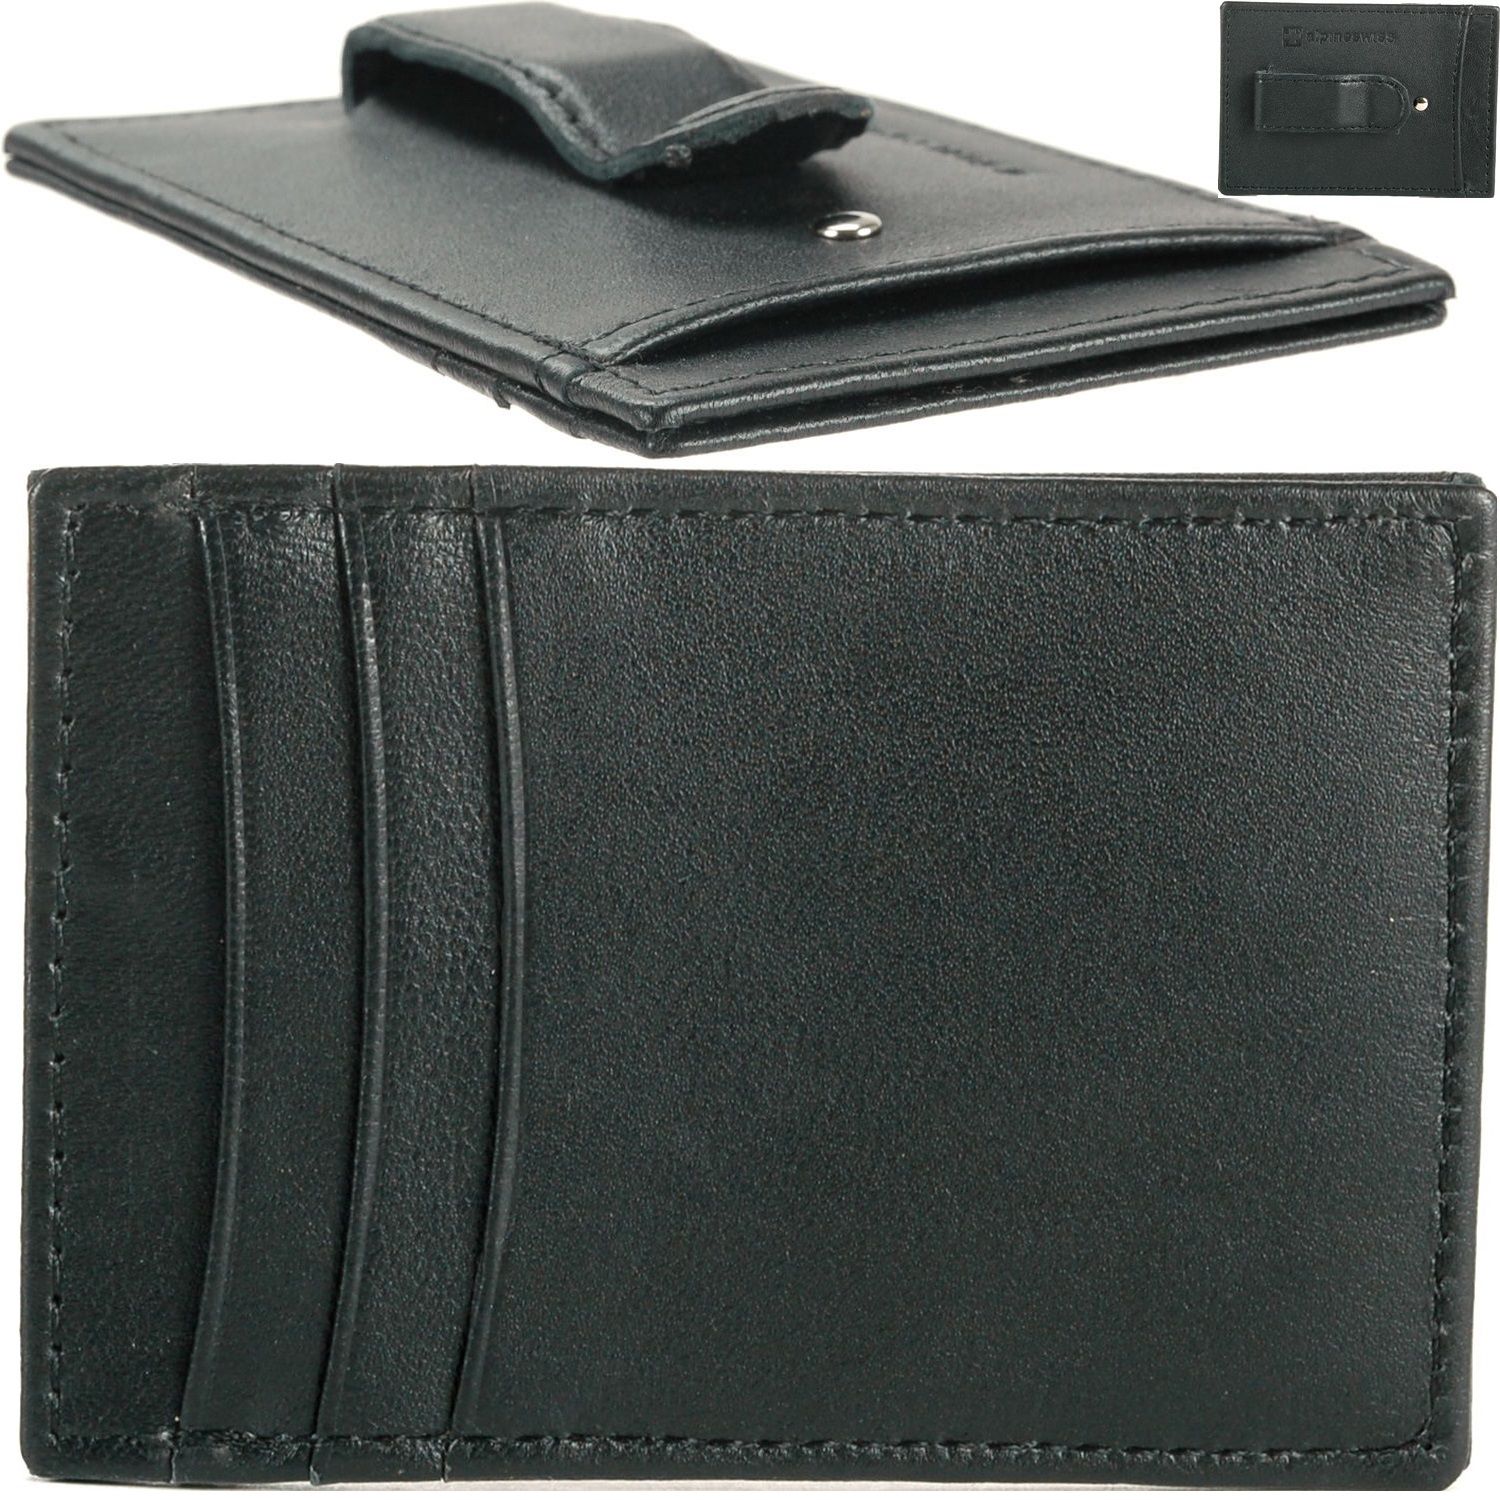 Alpine Swiss Mens Money Clip Thin Front Pocket Wallet Only $7.99 Shipped!